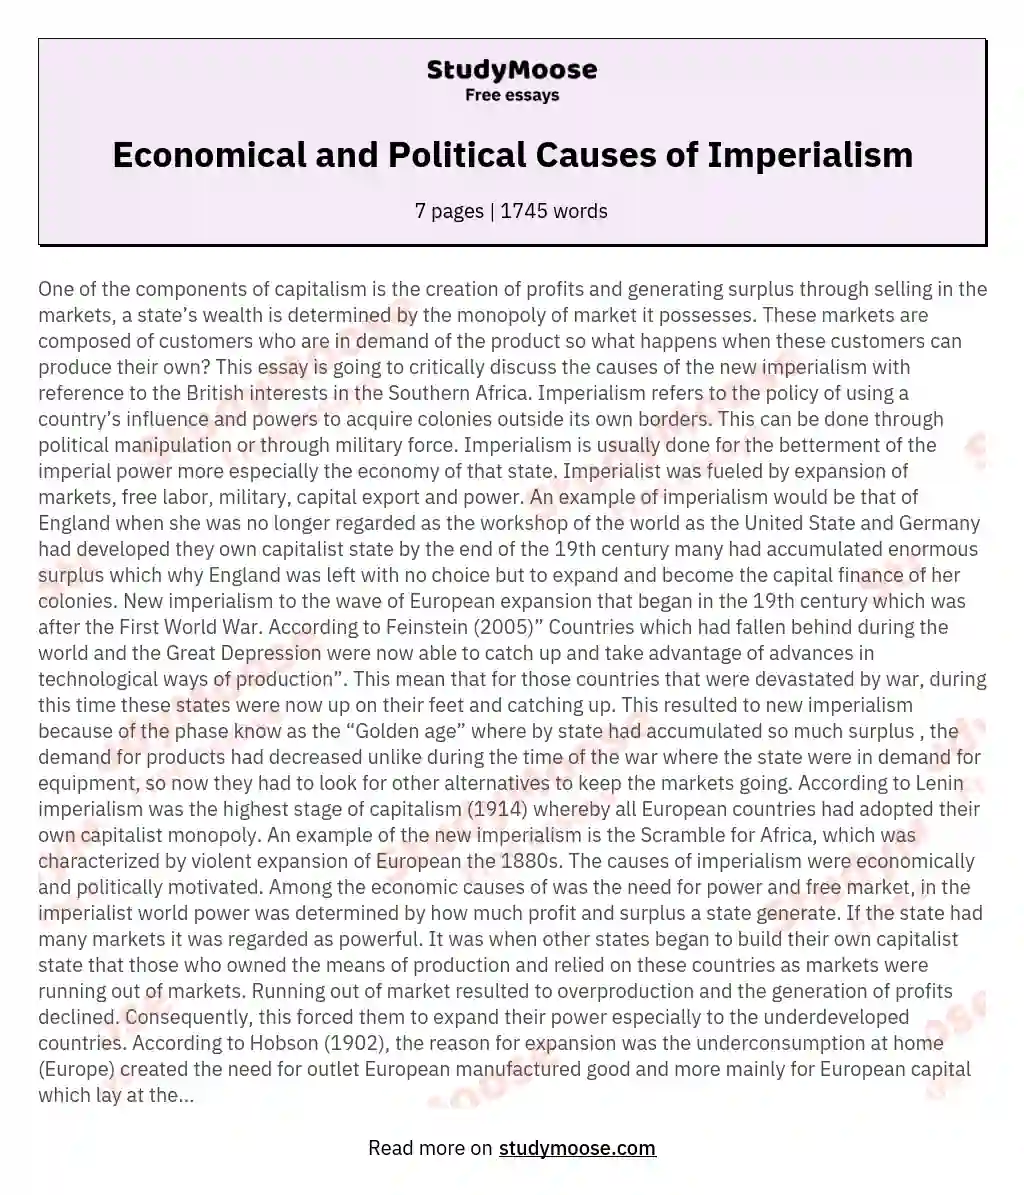 Economical and Political Causes of Imperialism essay